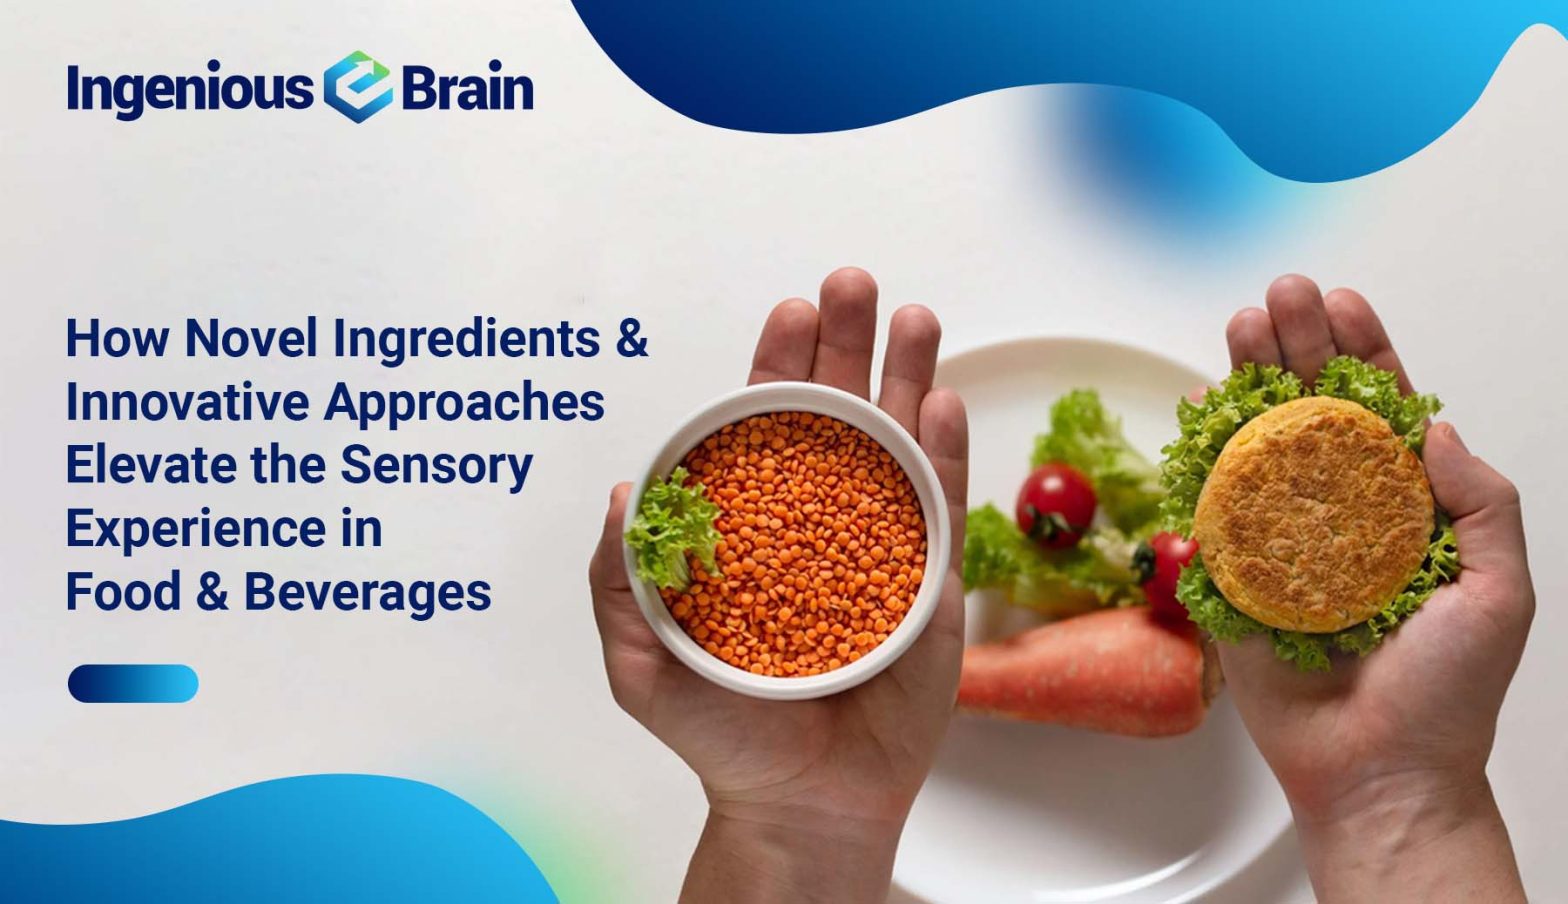 How Novel Ingredients & Innovative Approaches Elevate the sensory experience in food & beverages